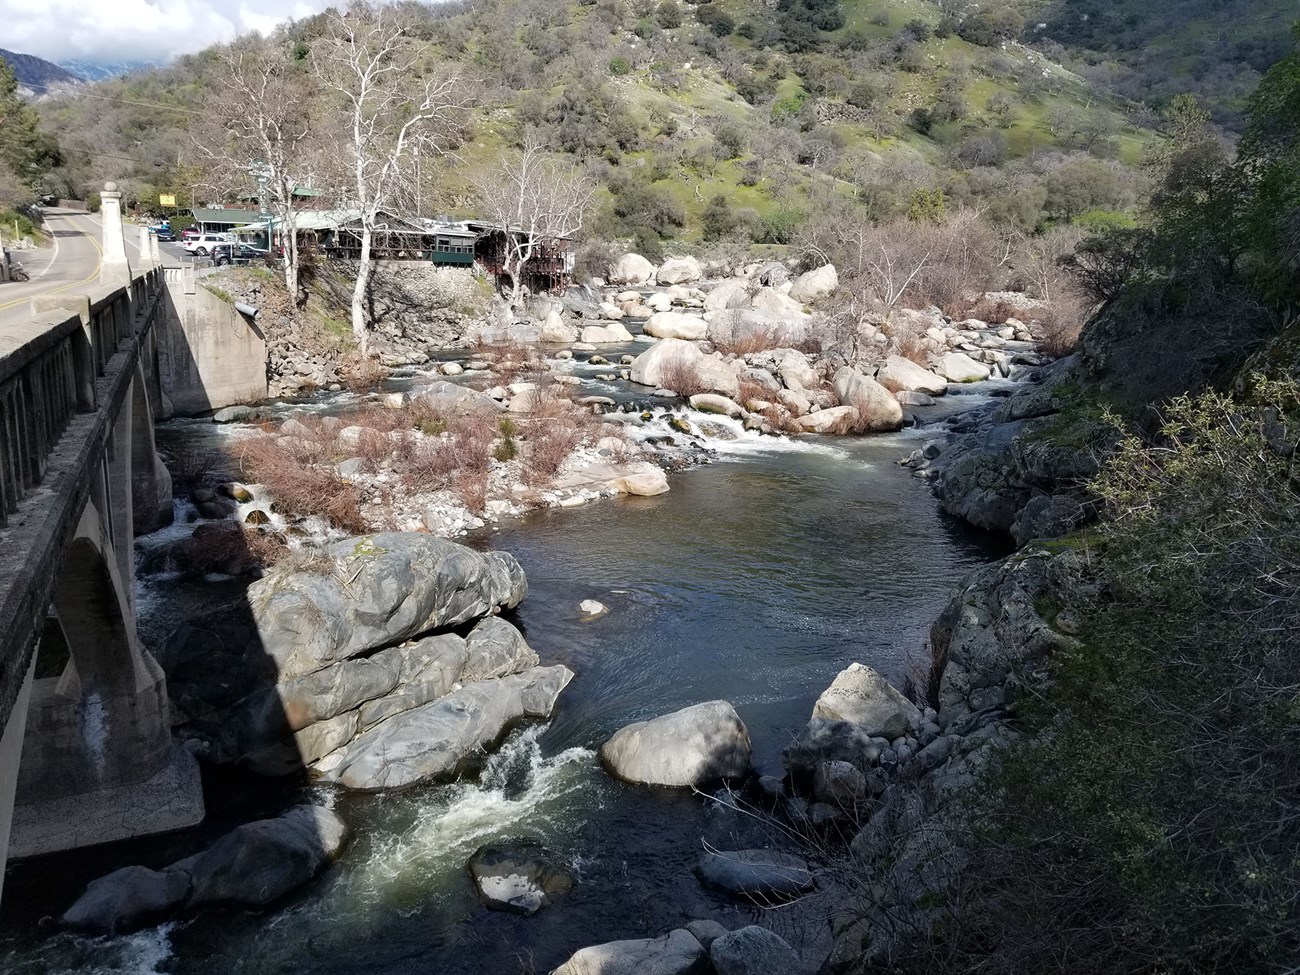 View of Kaweah River from bridge with low enough flow that all large rocks are visible, and water is clear, not muddy.